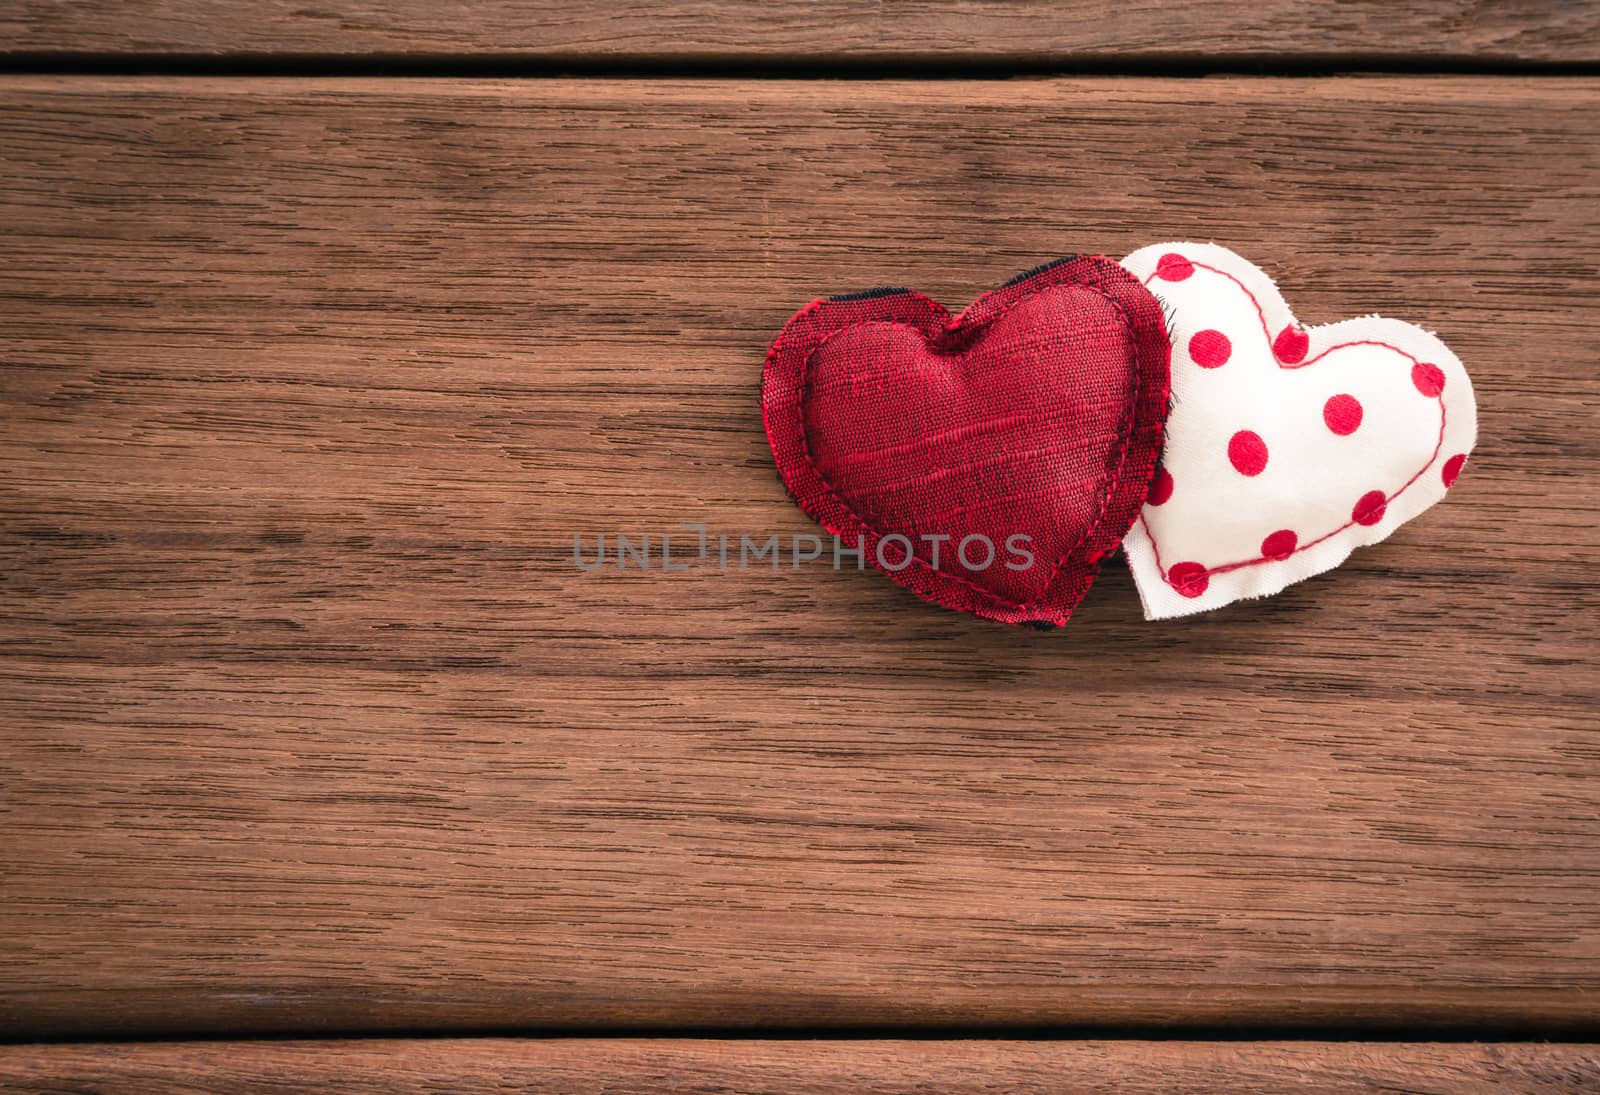 Red hearts handmade crafts from silk and cotton cloth place on wood texture, love and valentine's day symbol